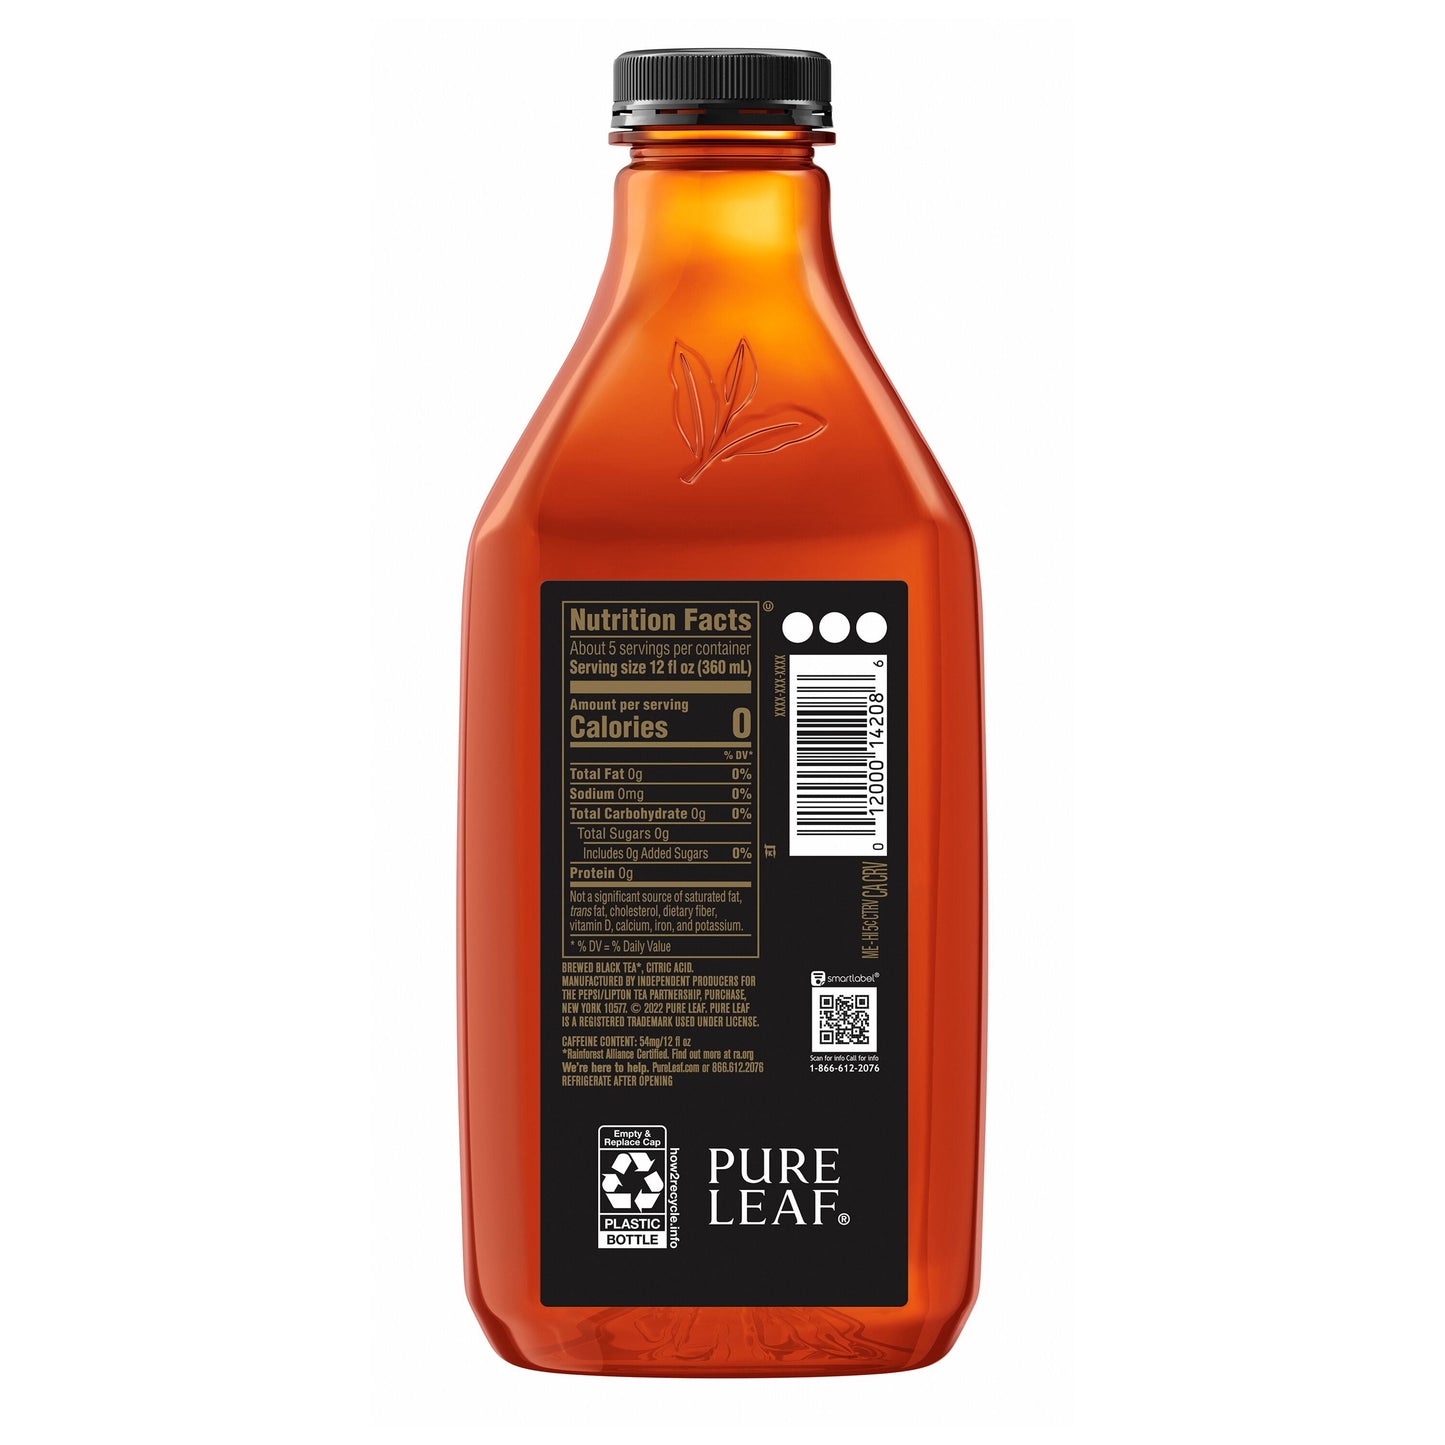 Pure Leaf Unsweetened Real Brewed Iced Tea, 64 oz Bottle